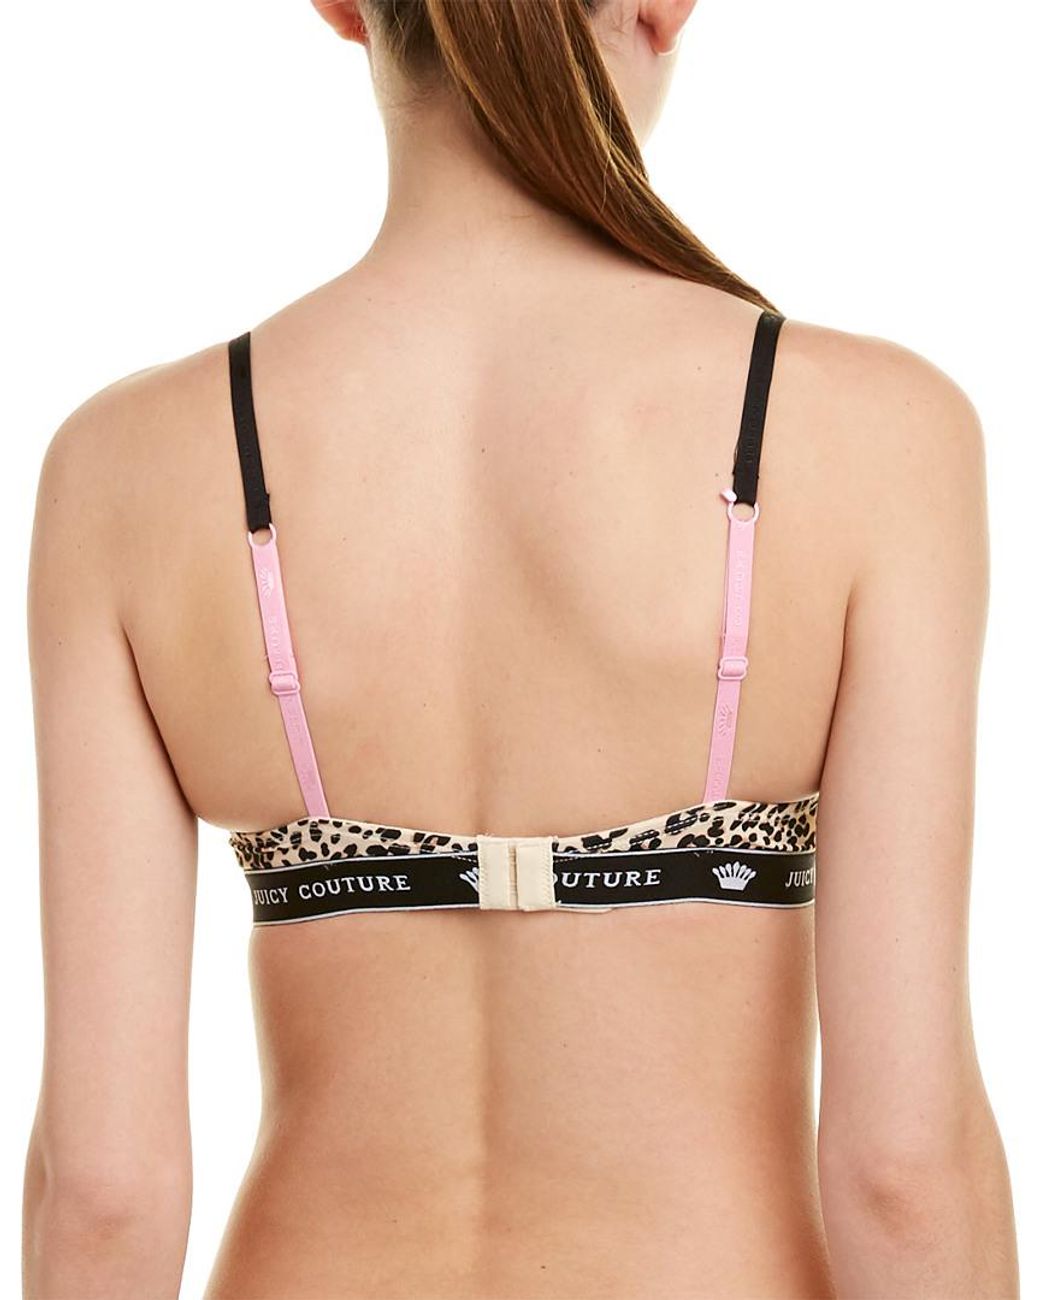 Juicy Couture Push-up Bra in Black